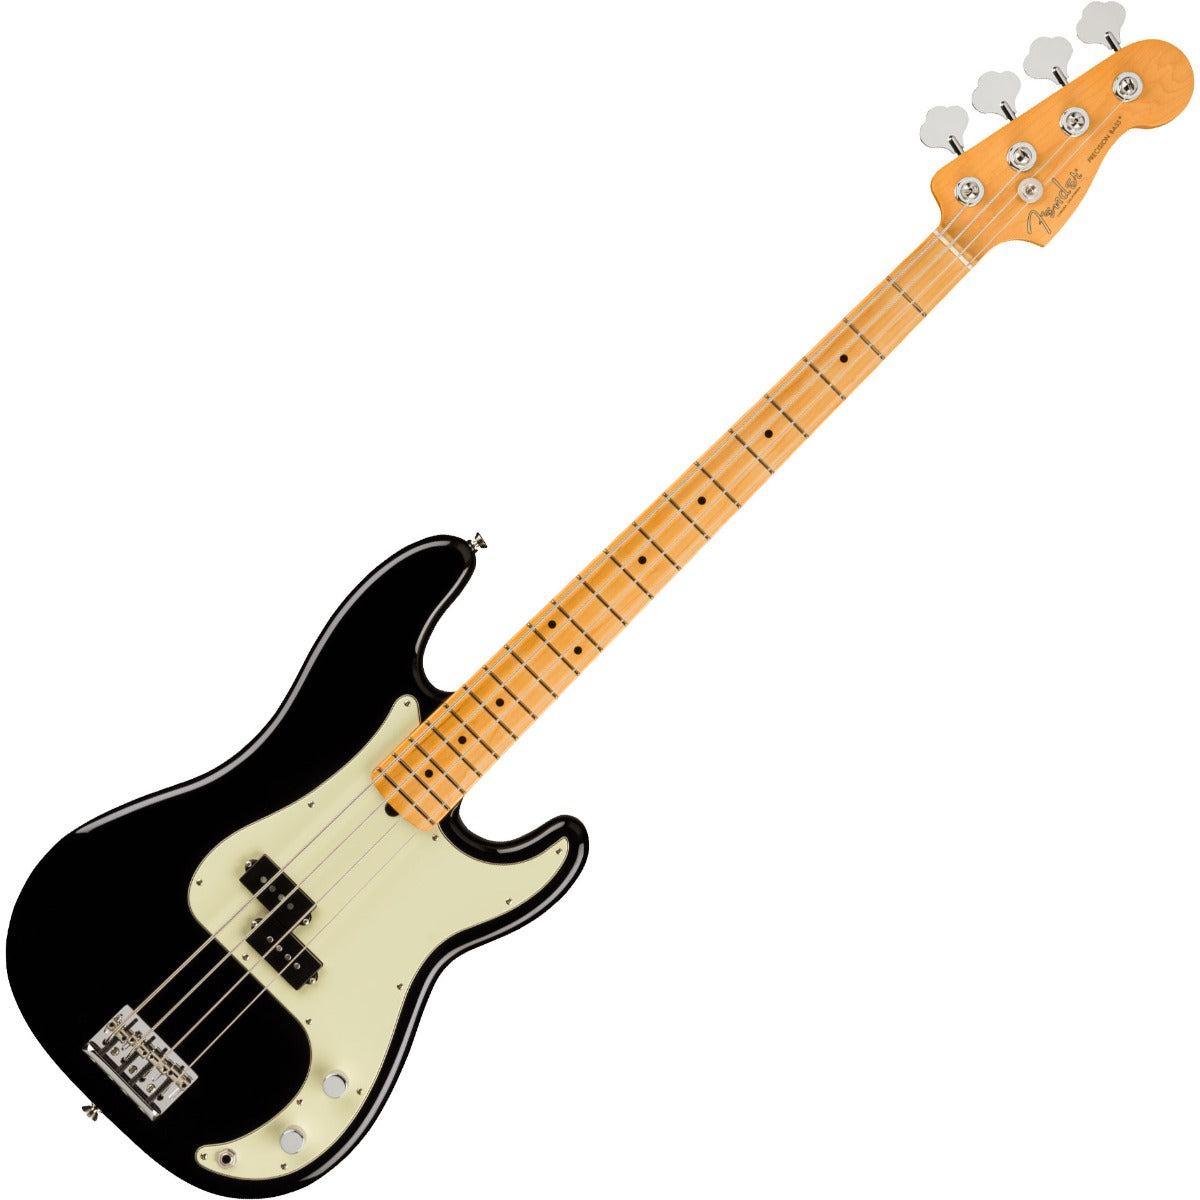 Top view of Fender American Pro II Precision Bass - Maple, Black